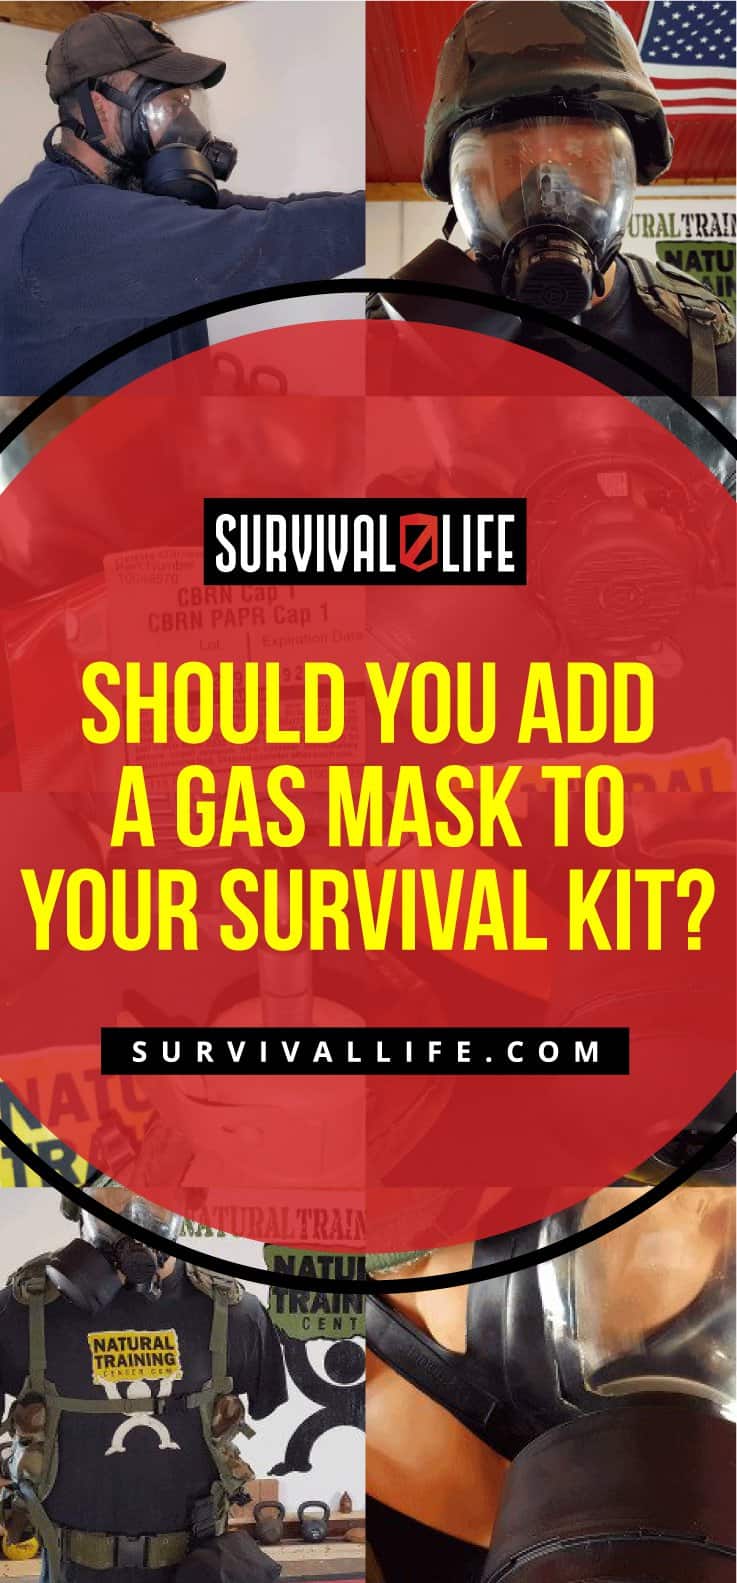 Placard | Should You Add A Gas Mask To Your Survival Kit?